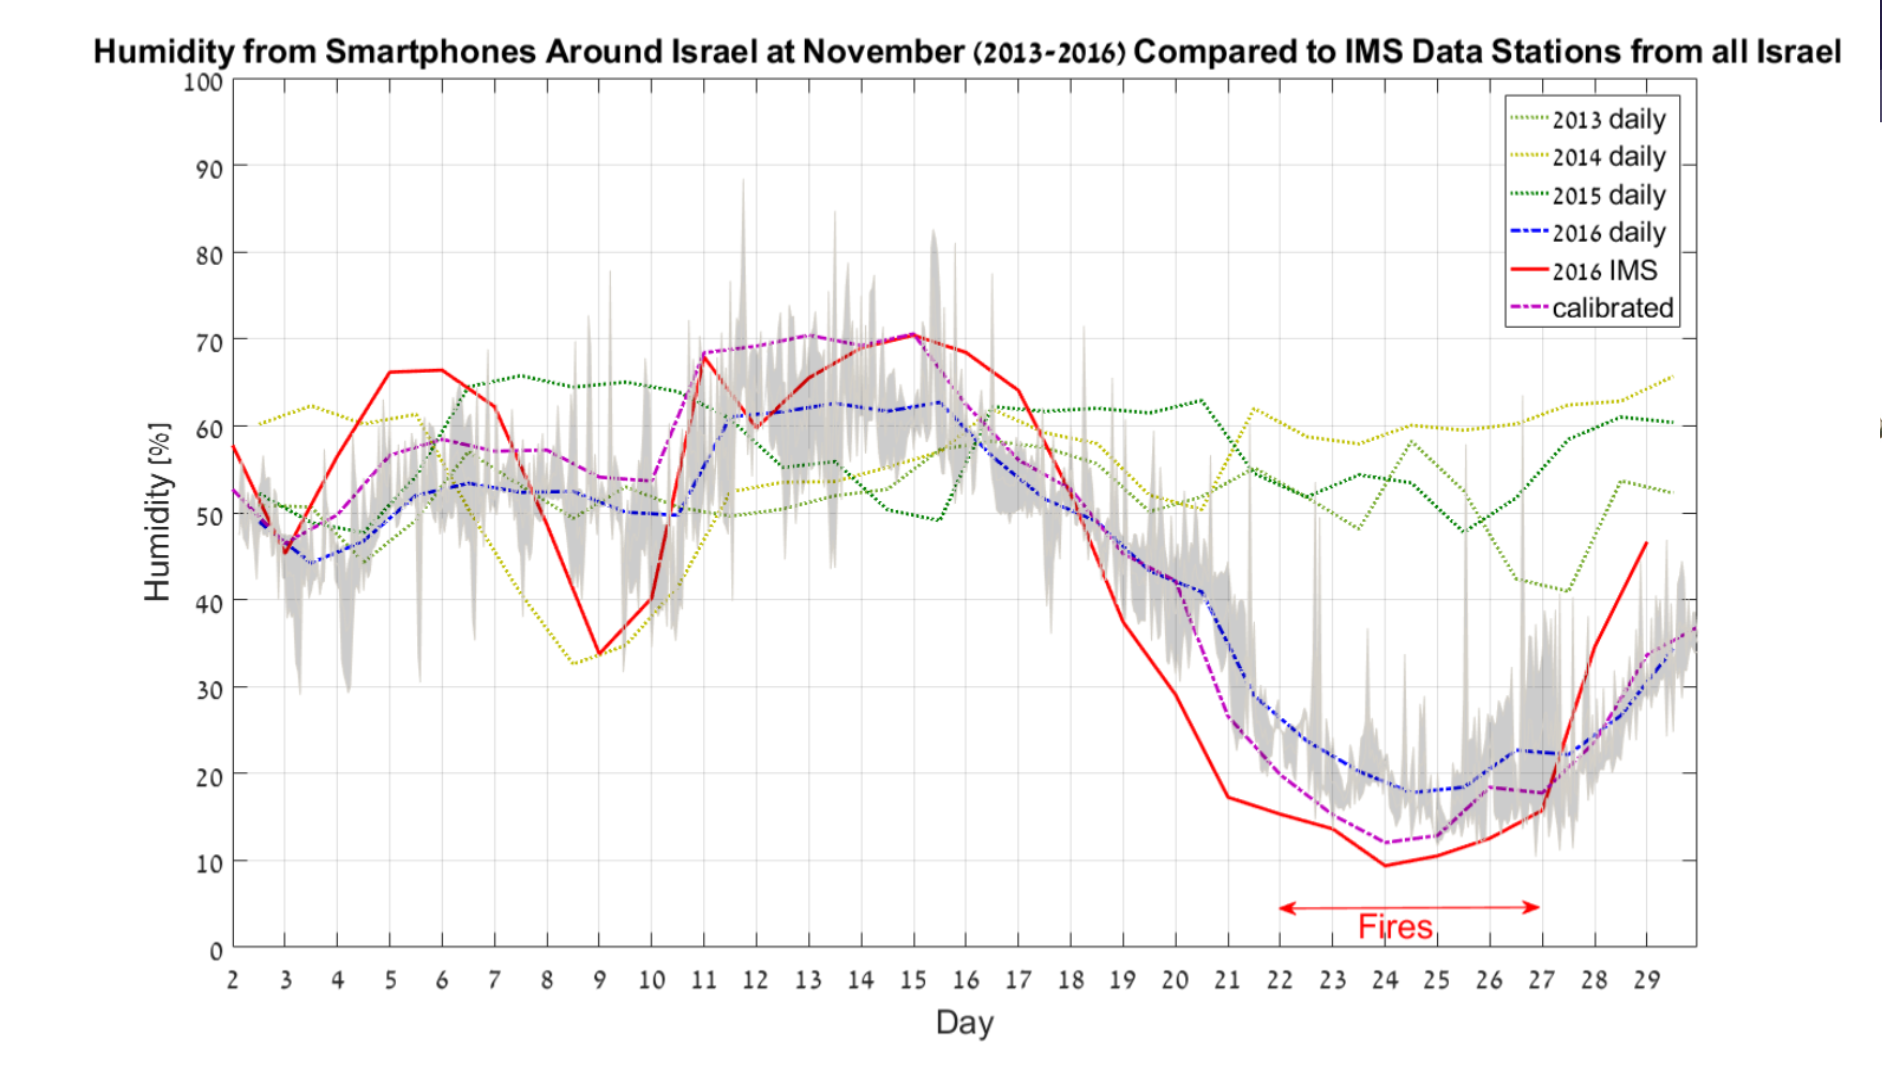 Humidity from Smartphones around Israel at November 2013-2016 compared to IMS data stations from all Israel